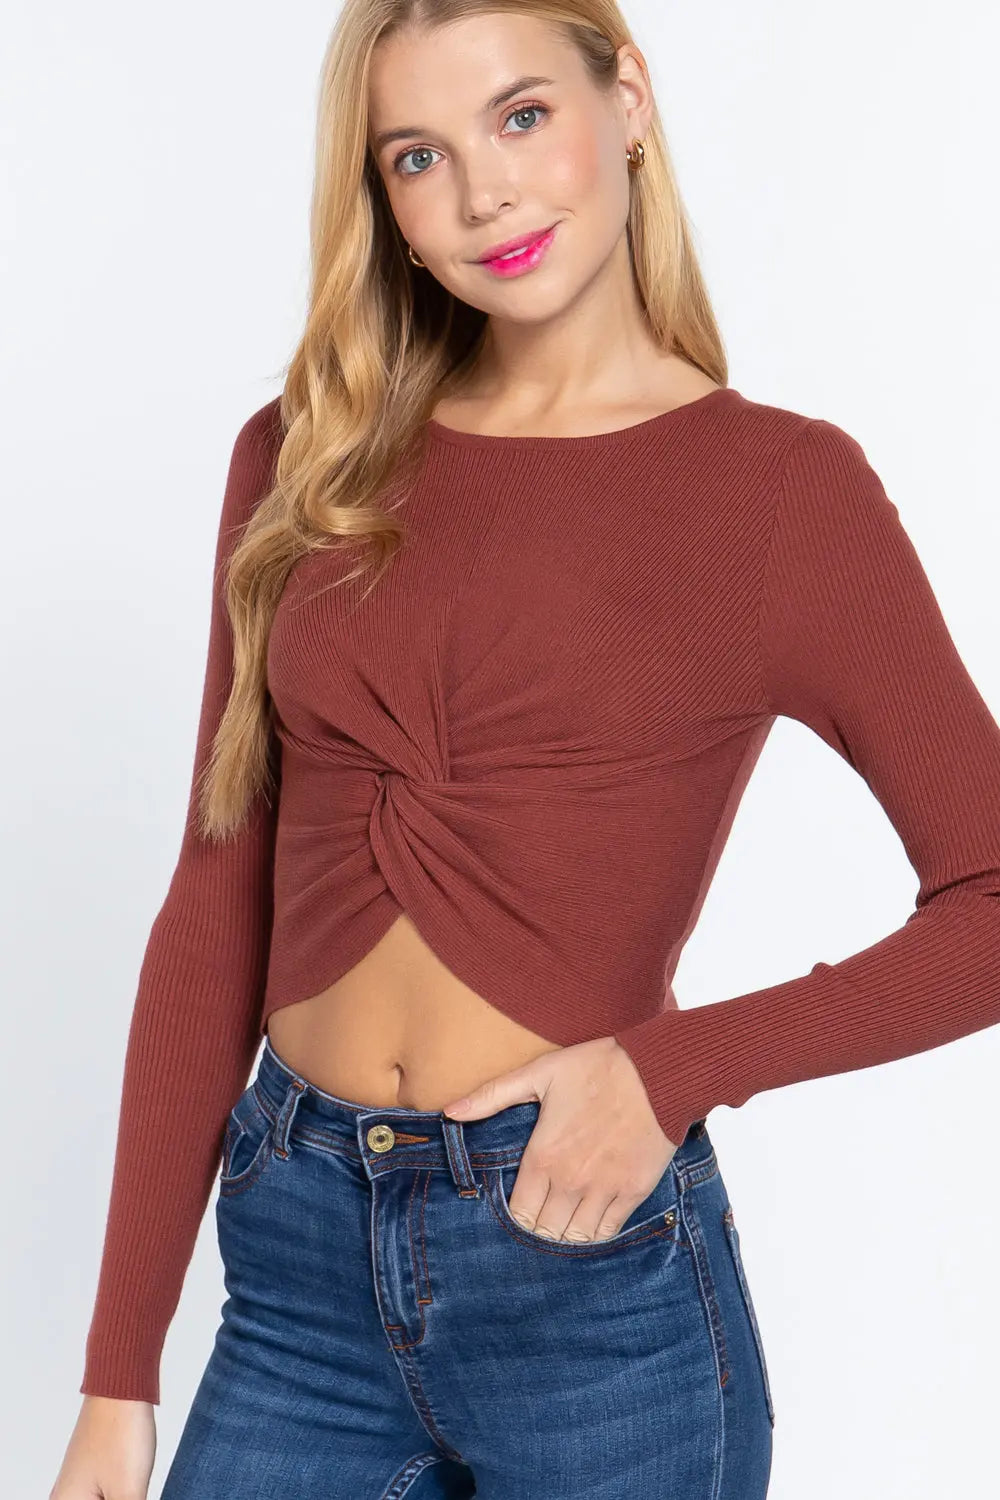 Crew Neck Knotted Crop Sweater Sunny EvE Fashion